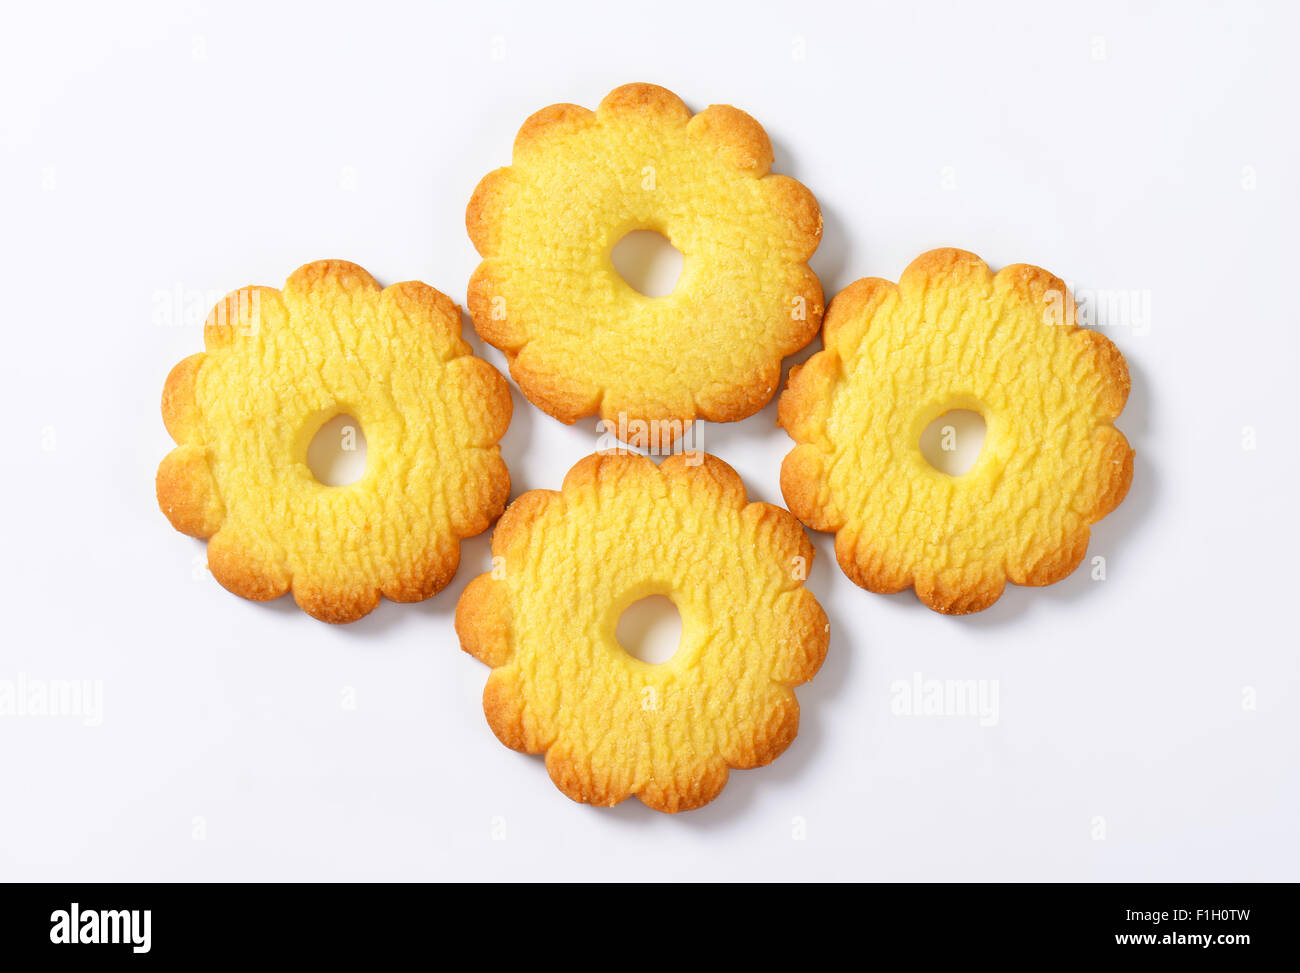 four italian butter cookies Canestrelli on white background Stock Photo